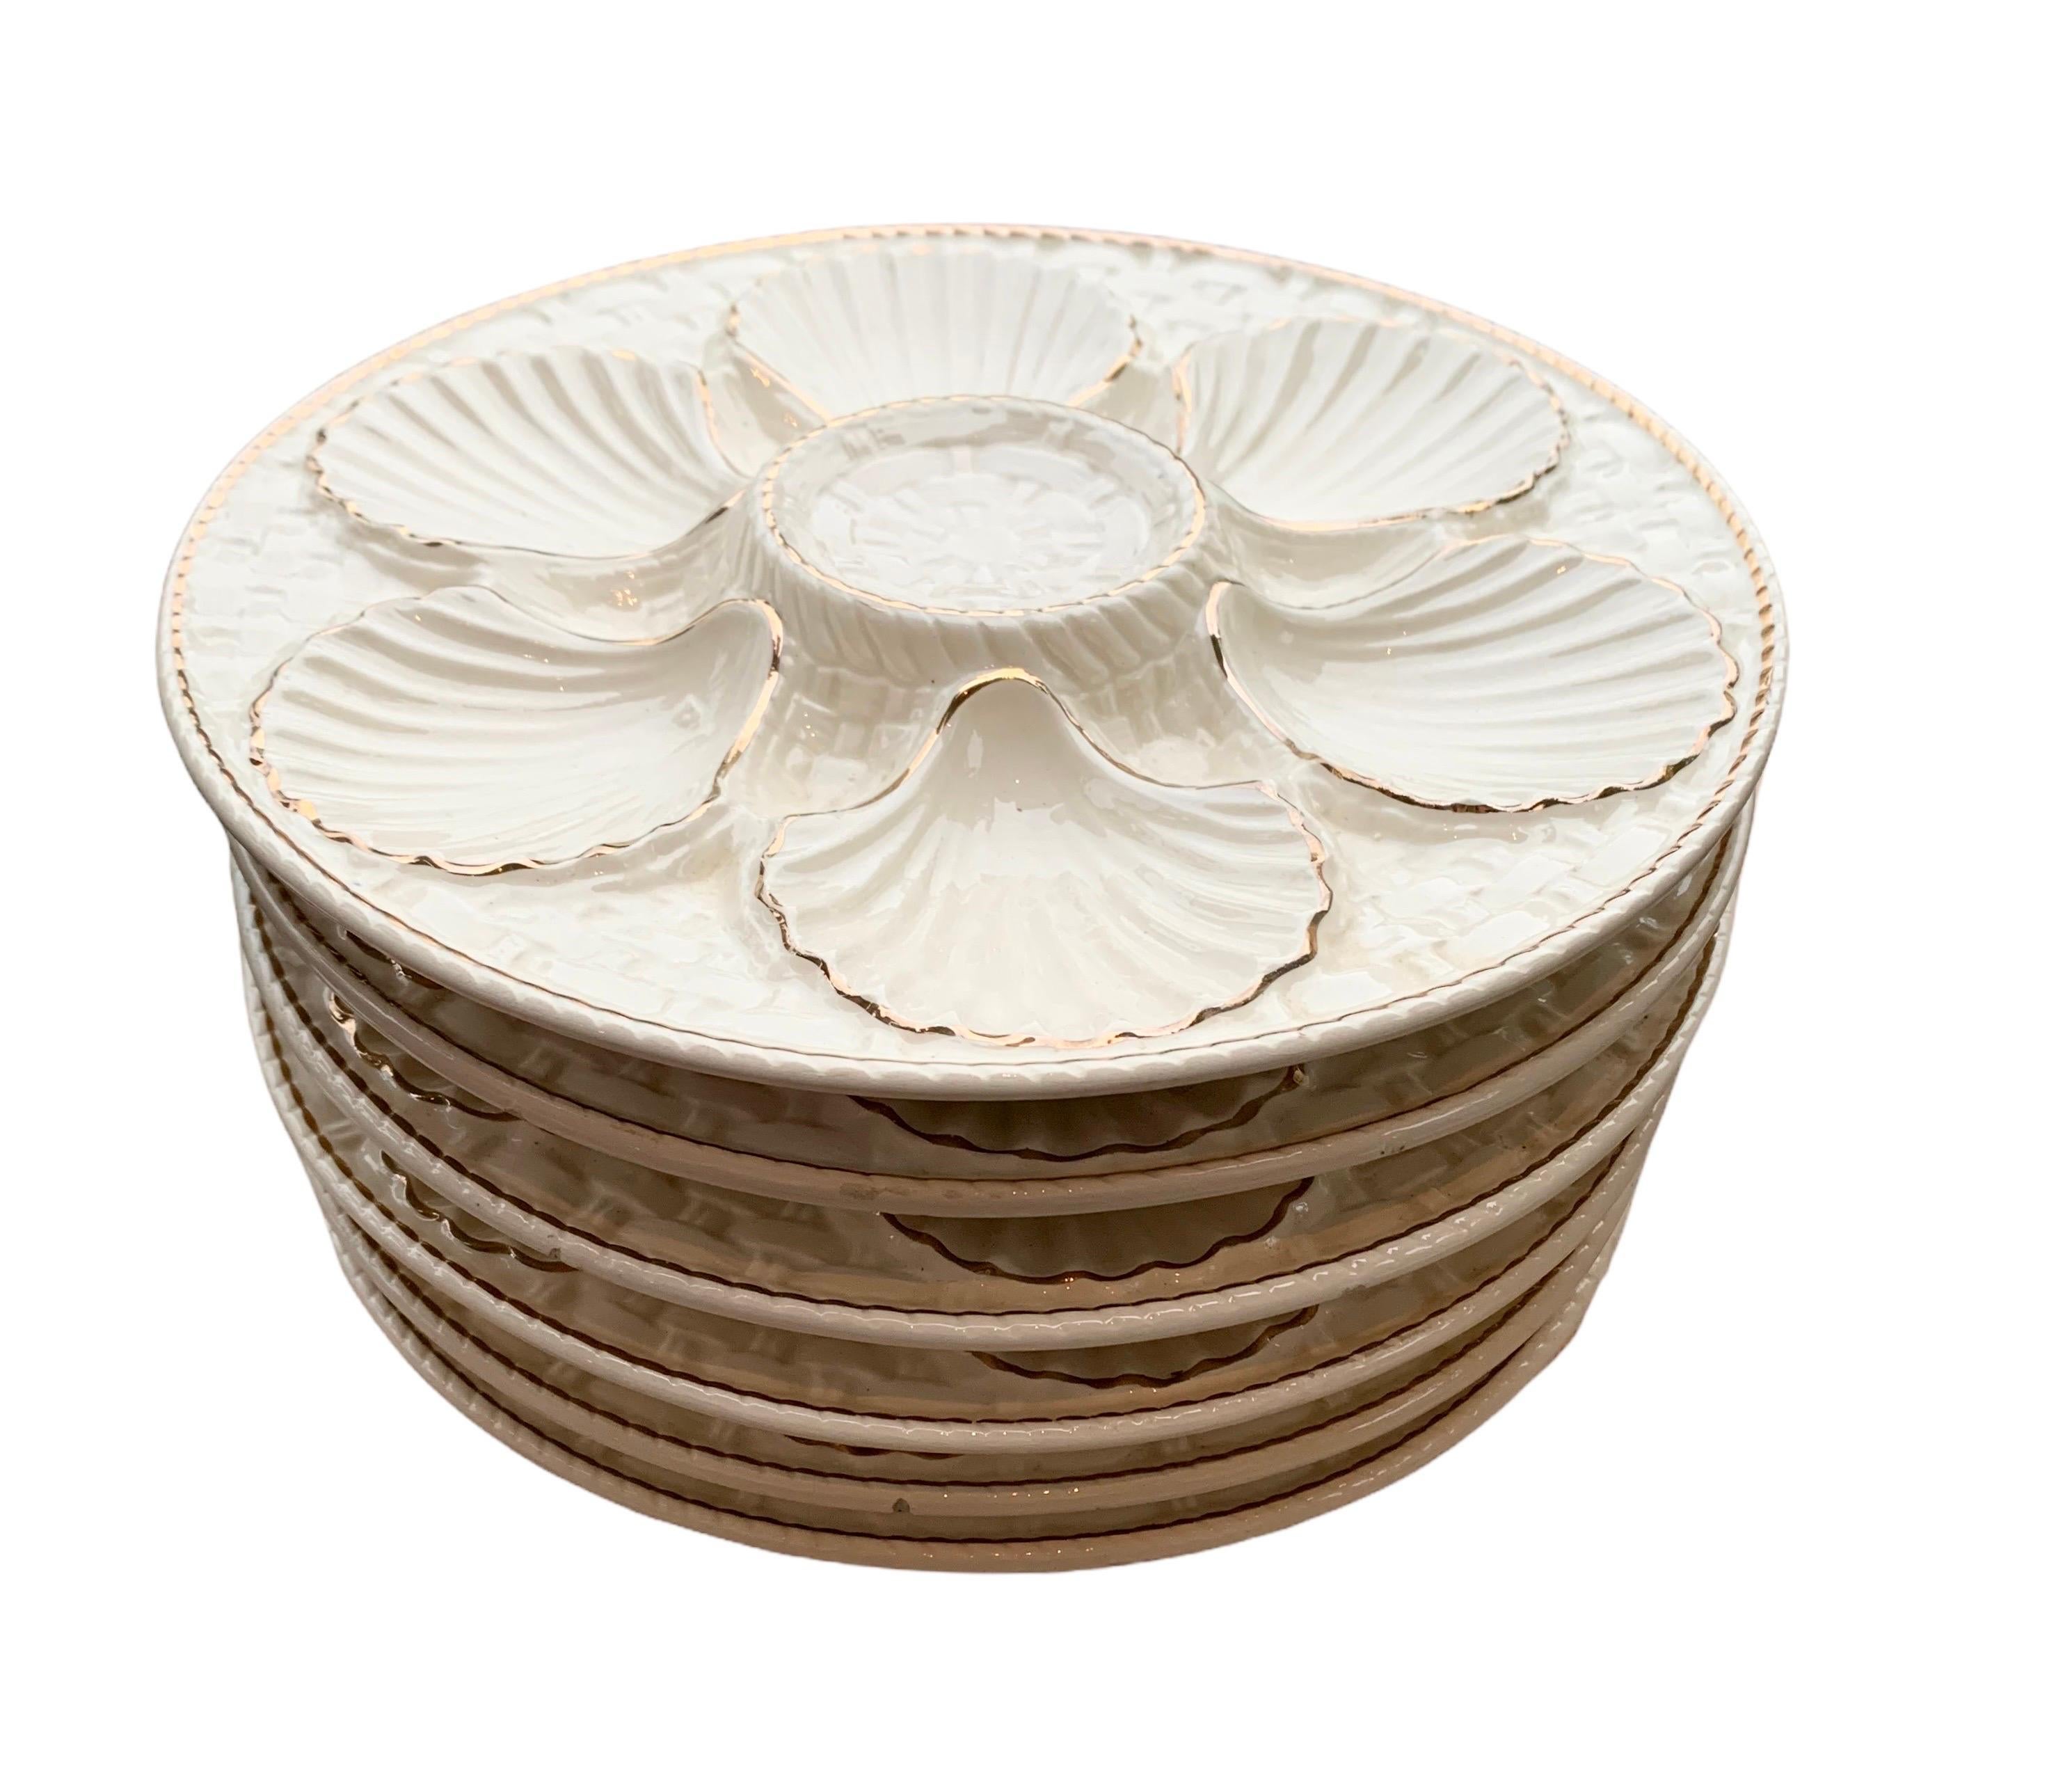 Hand-Painted Vintage French White Oyster Plates with Gold Trim